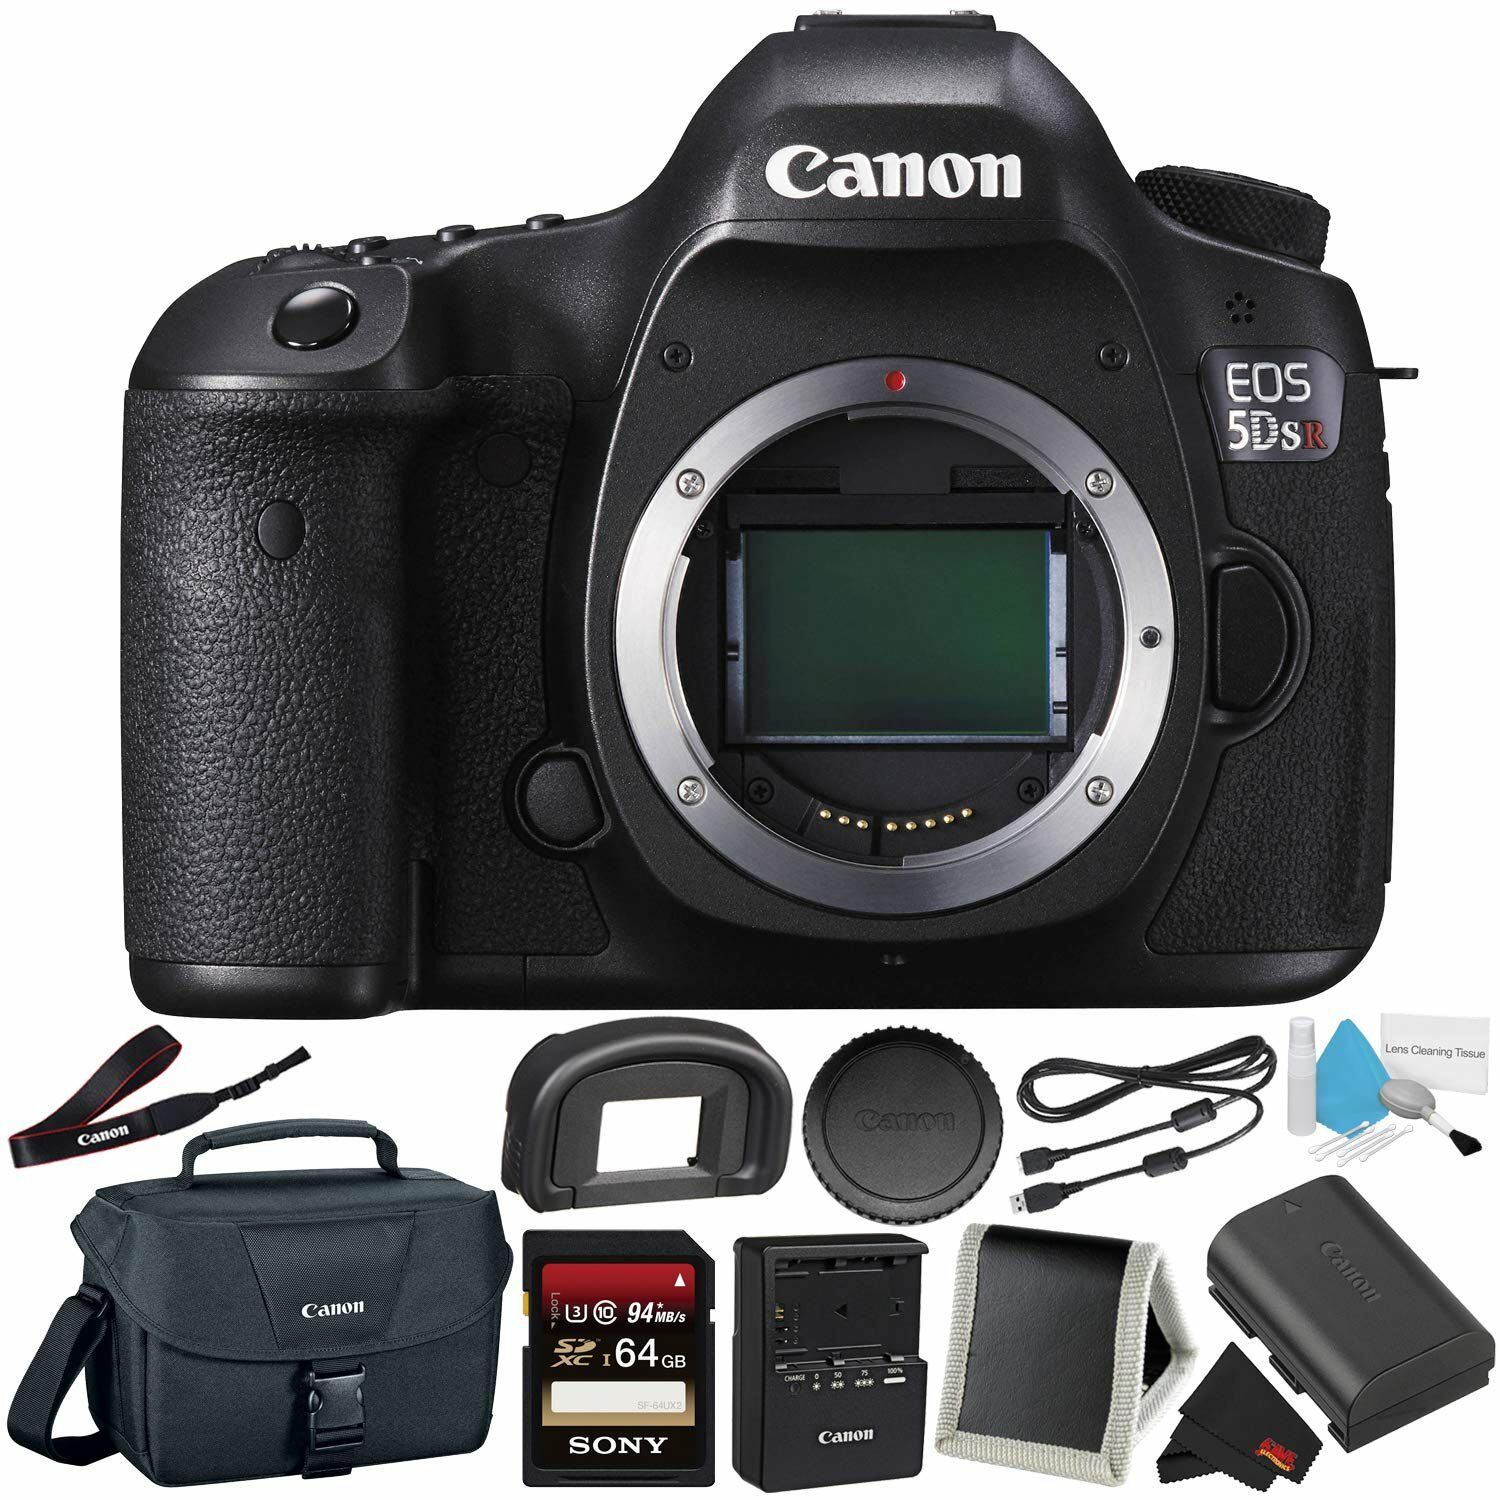 Canon EOS 5DS R Digital SLR Camera 0582C002 (Body Only) - Camera Bundle with 32GB Memory Card + More - image 1 of 4